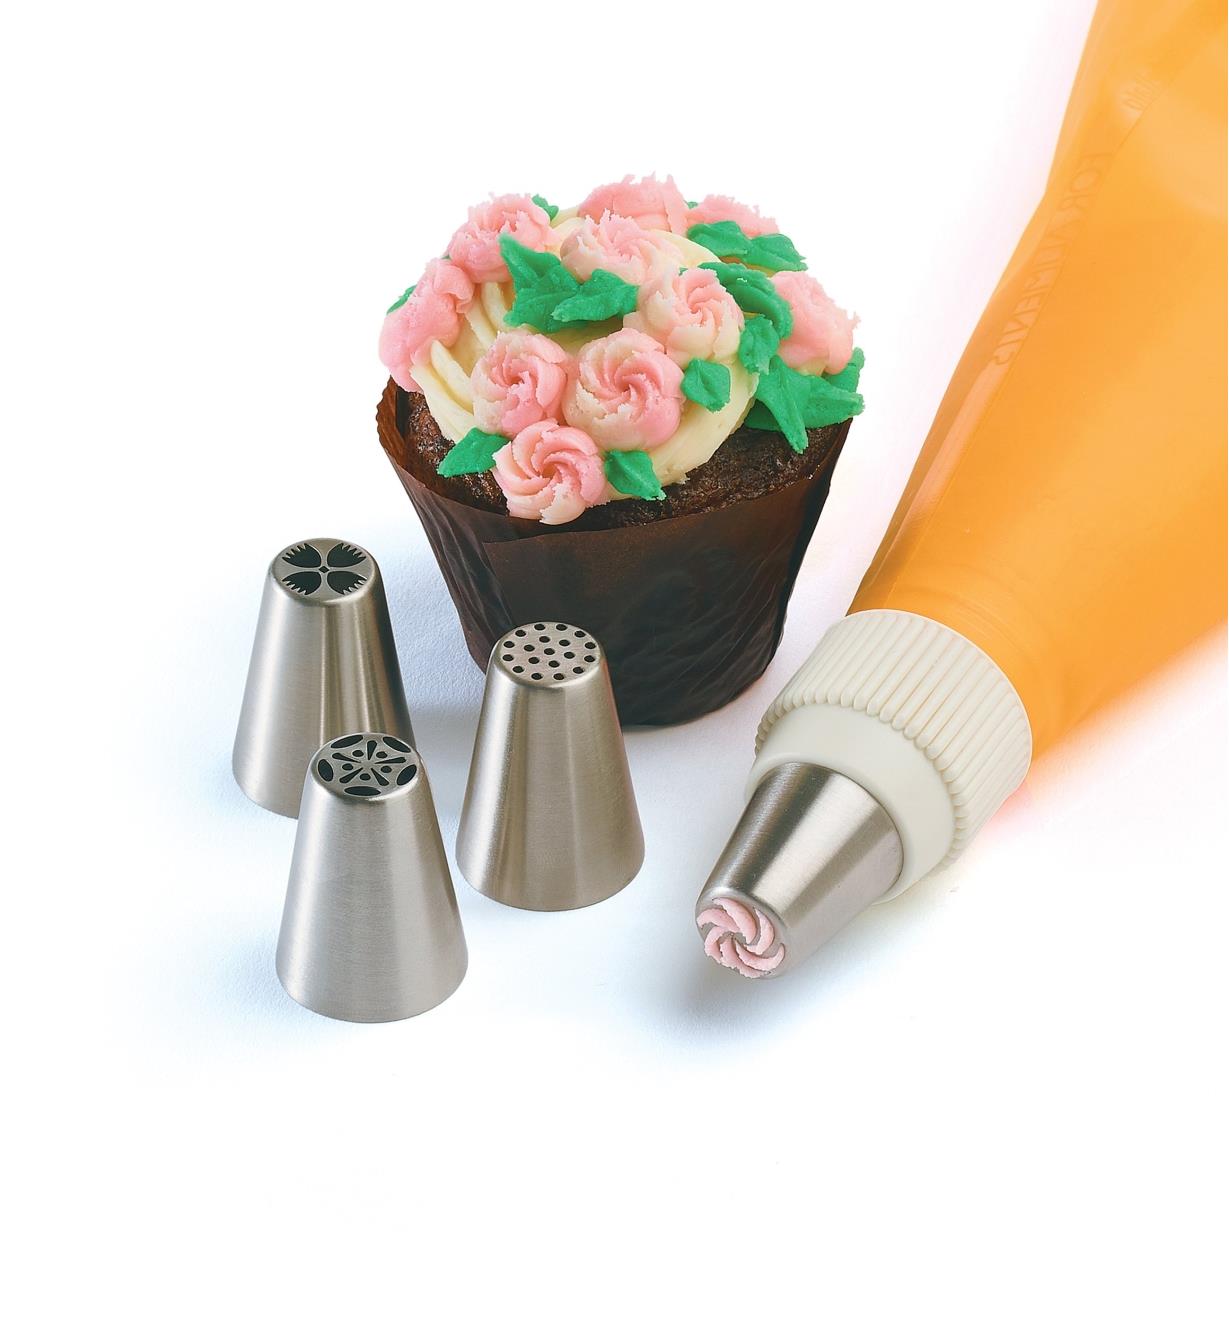 Set of 4 medium piping tips sitting next to a decorated cupcake, with one tip attached to a piping bag, sold separately